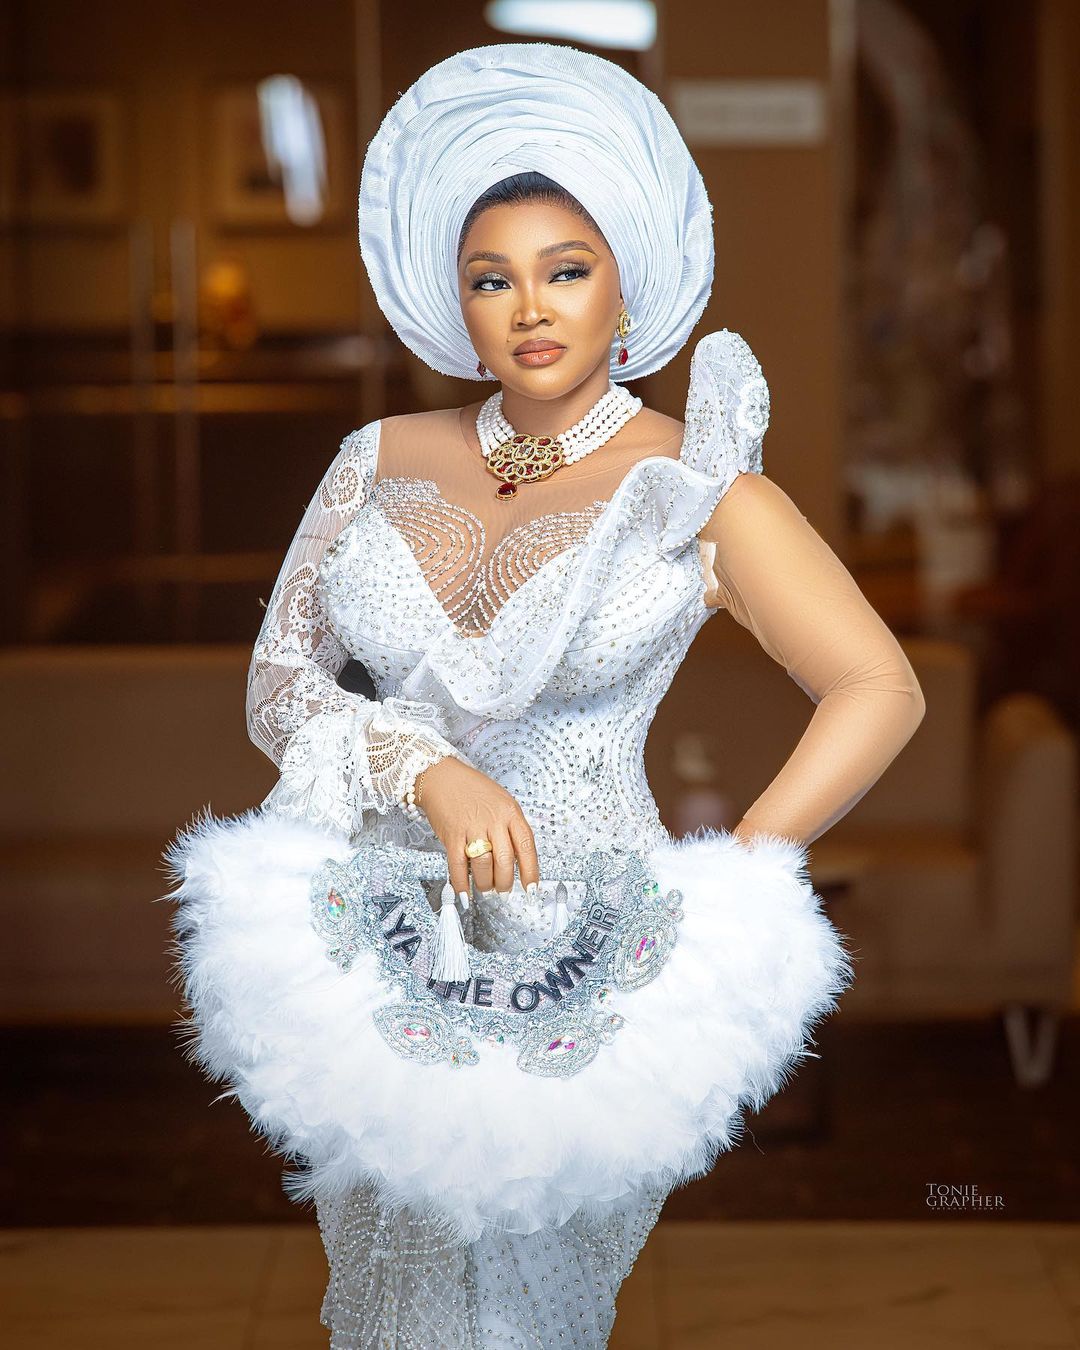 Mercy Aigbe reveals why she decided no children for her second husband